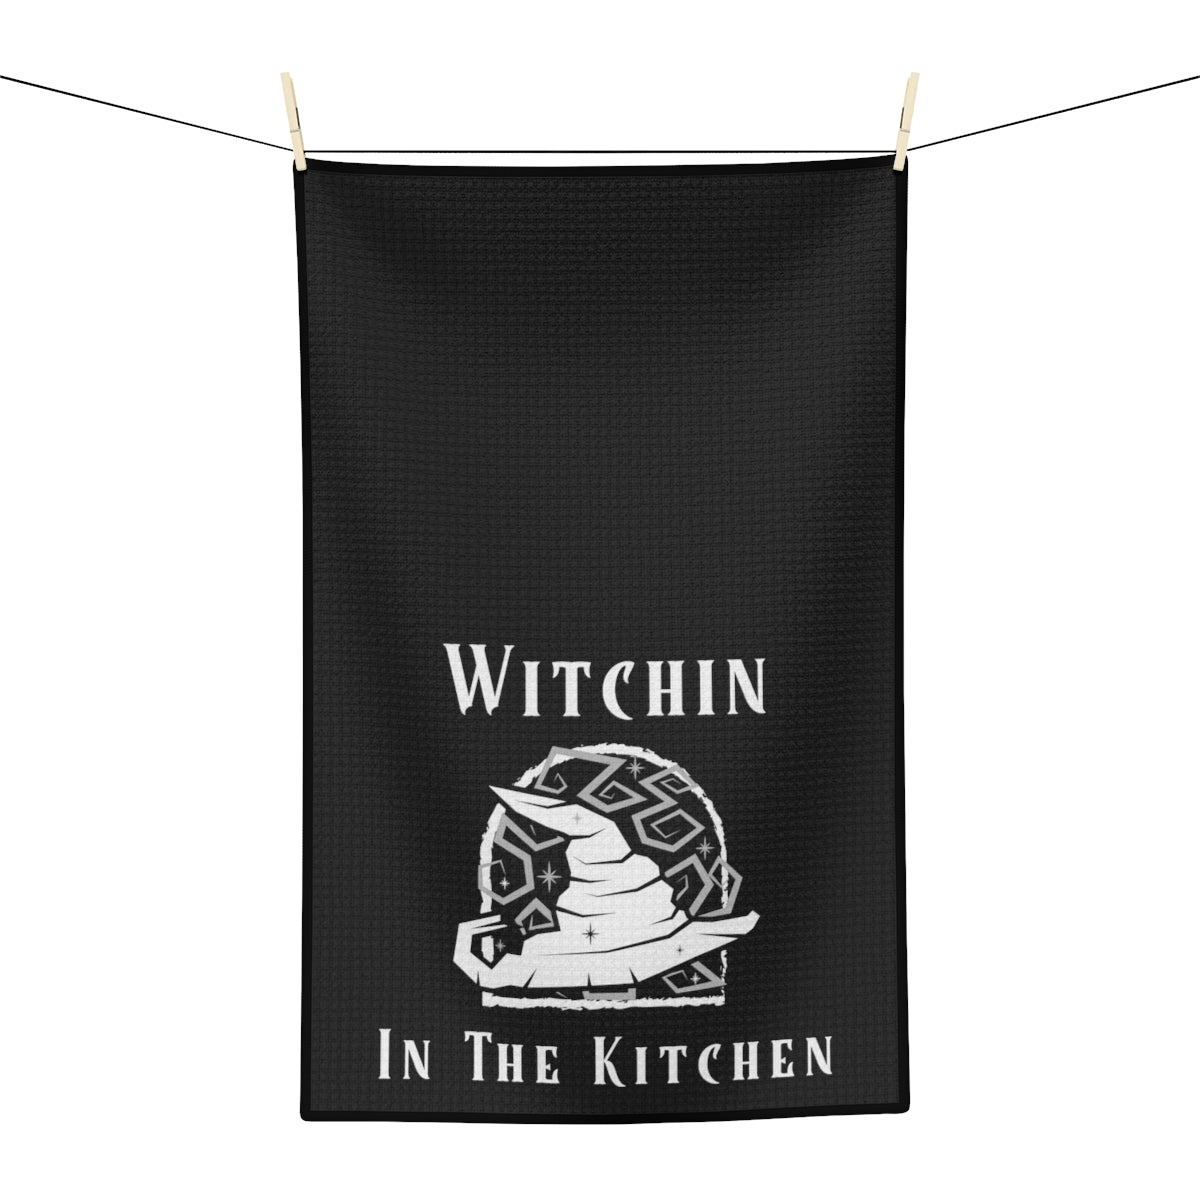 Witchin In The Kitchen Tea Towel - Witchy Kitchens